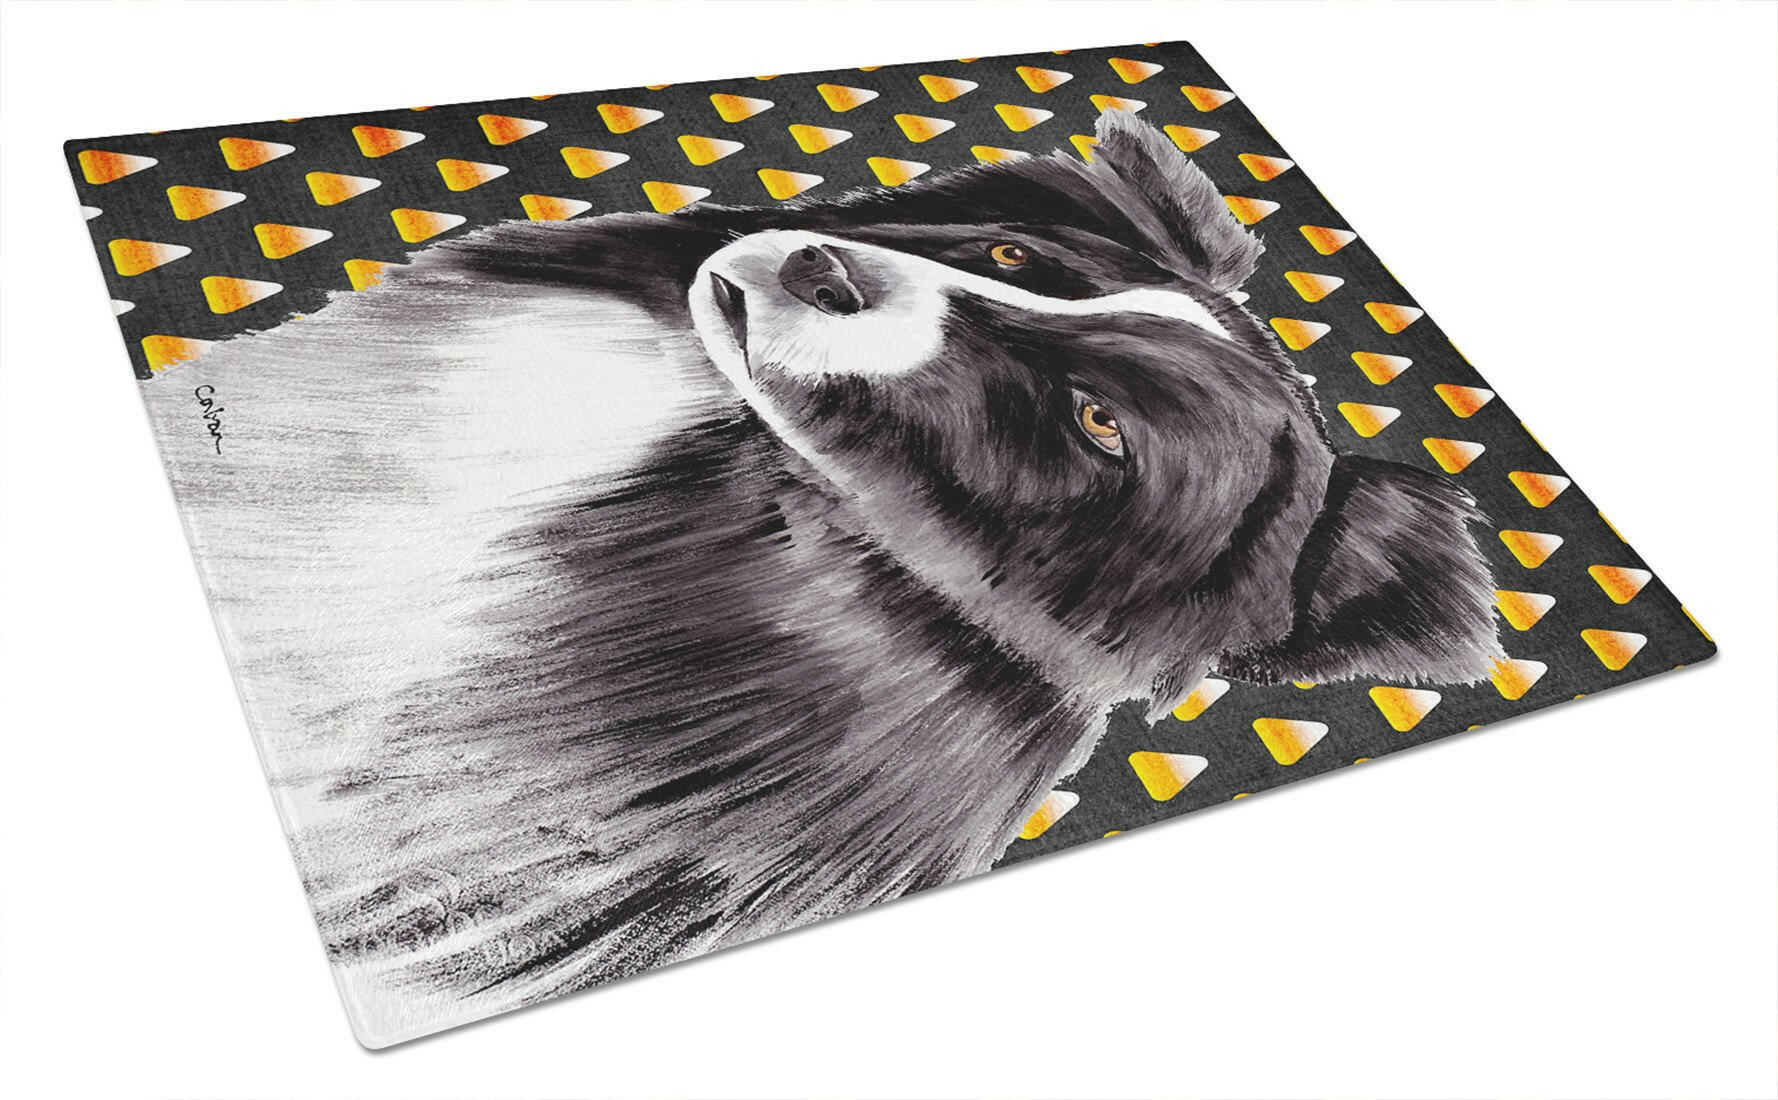 Border Collie Candy Corn Halloween Portrait Glass Cutting Board Large by Caroline's Treasures